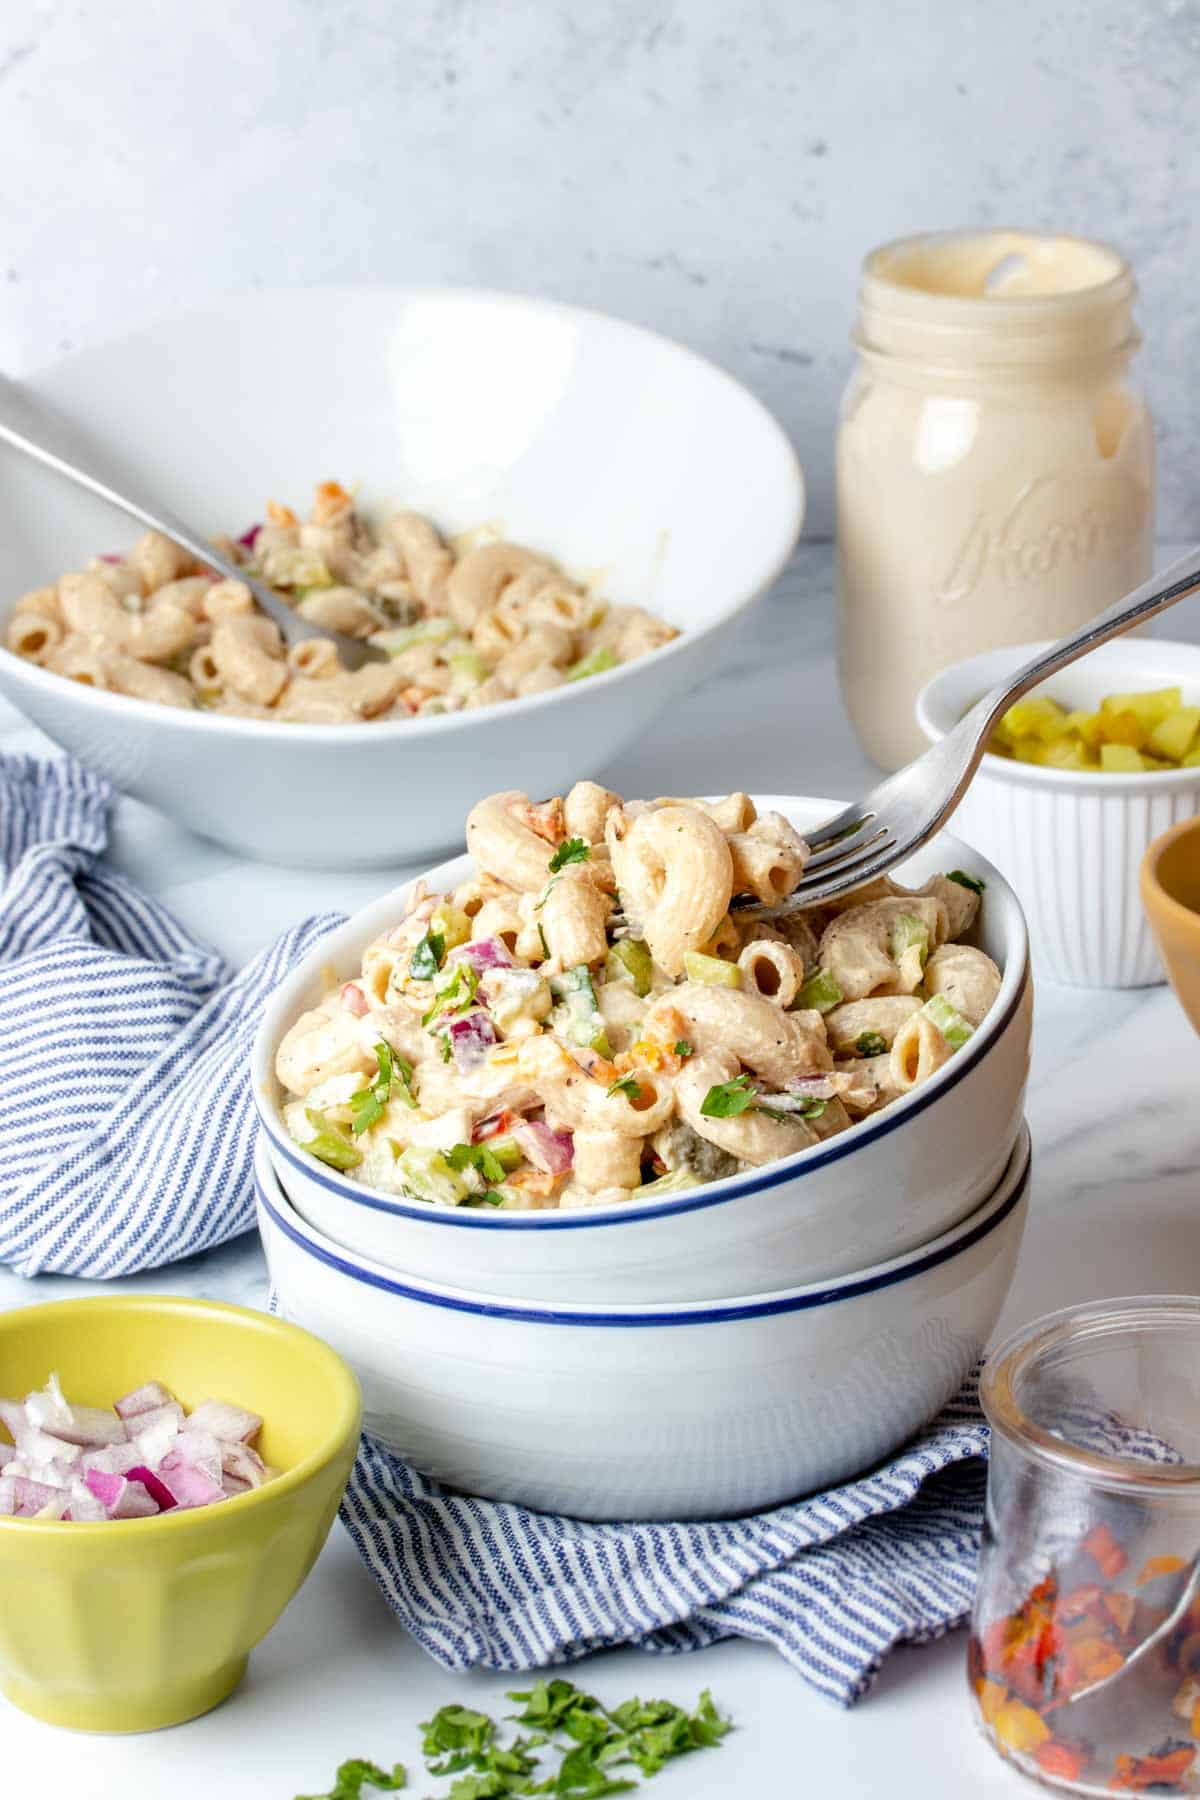 Two white bowls stacked and filled with creamy macaroni salad and a fork getting a bite from it.